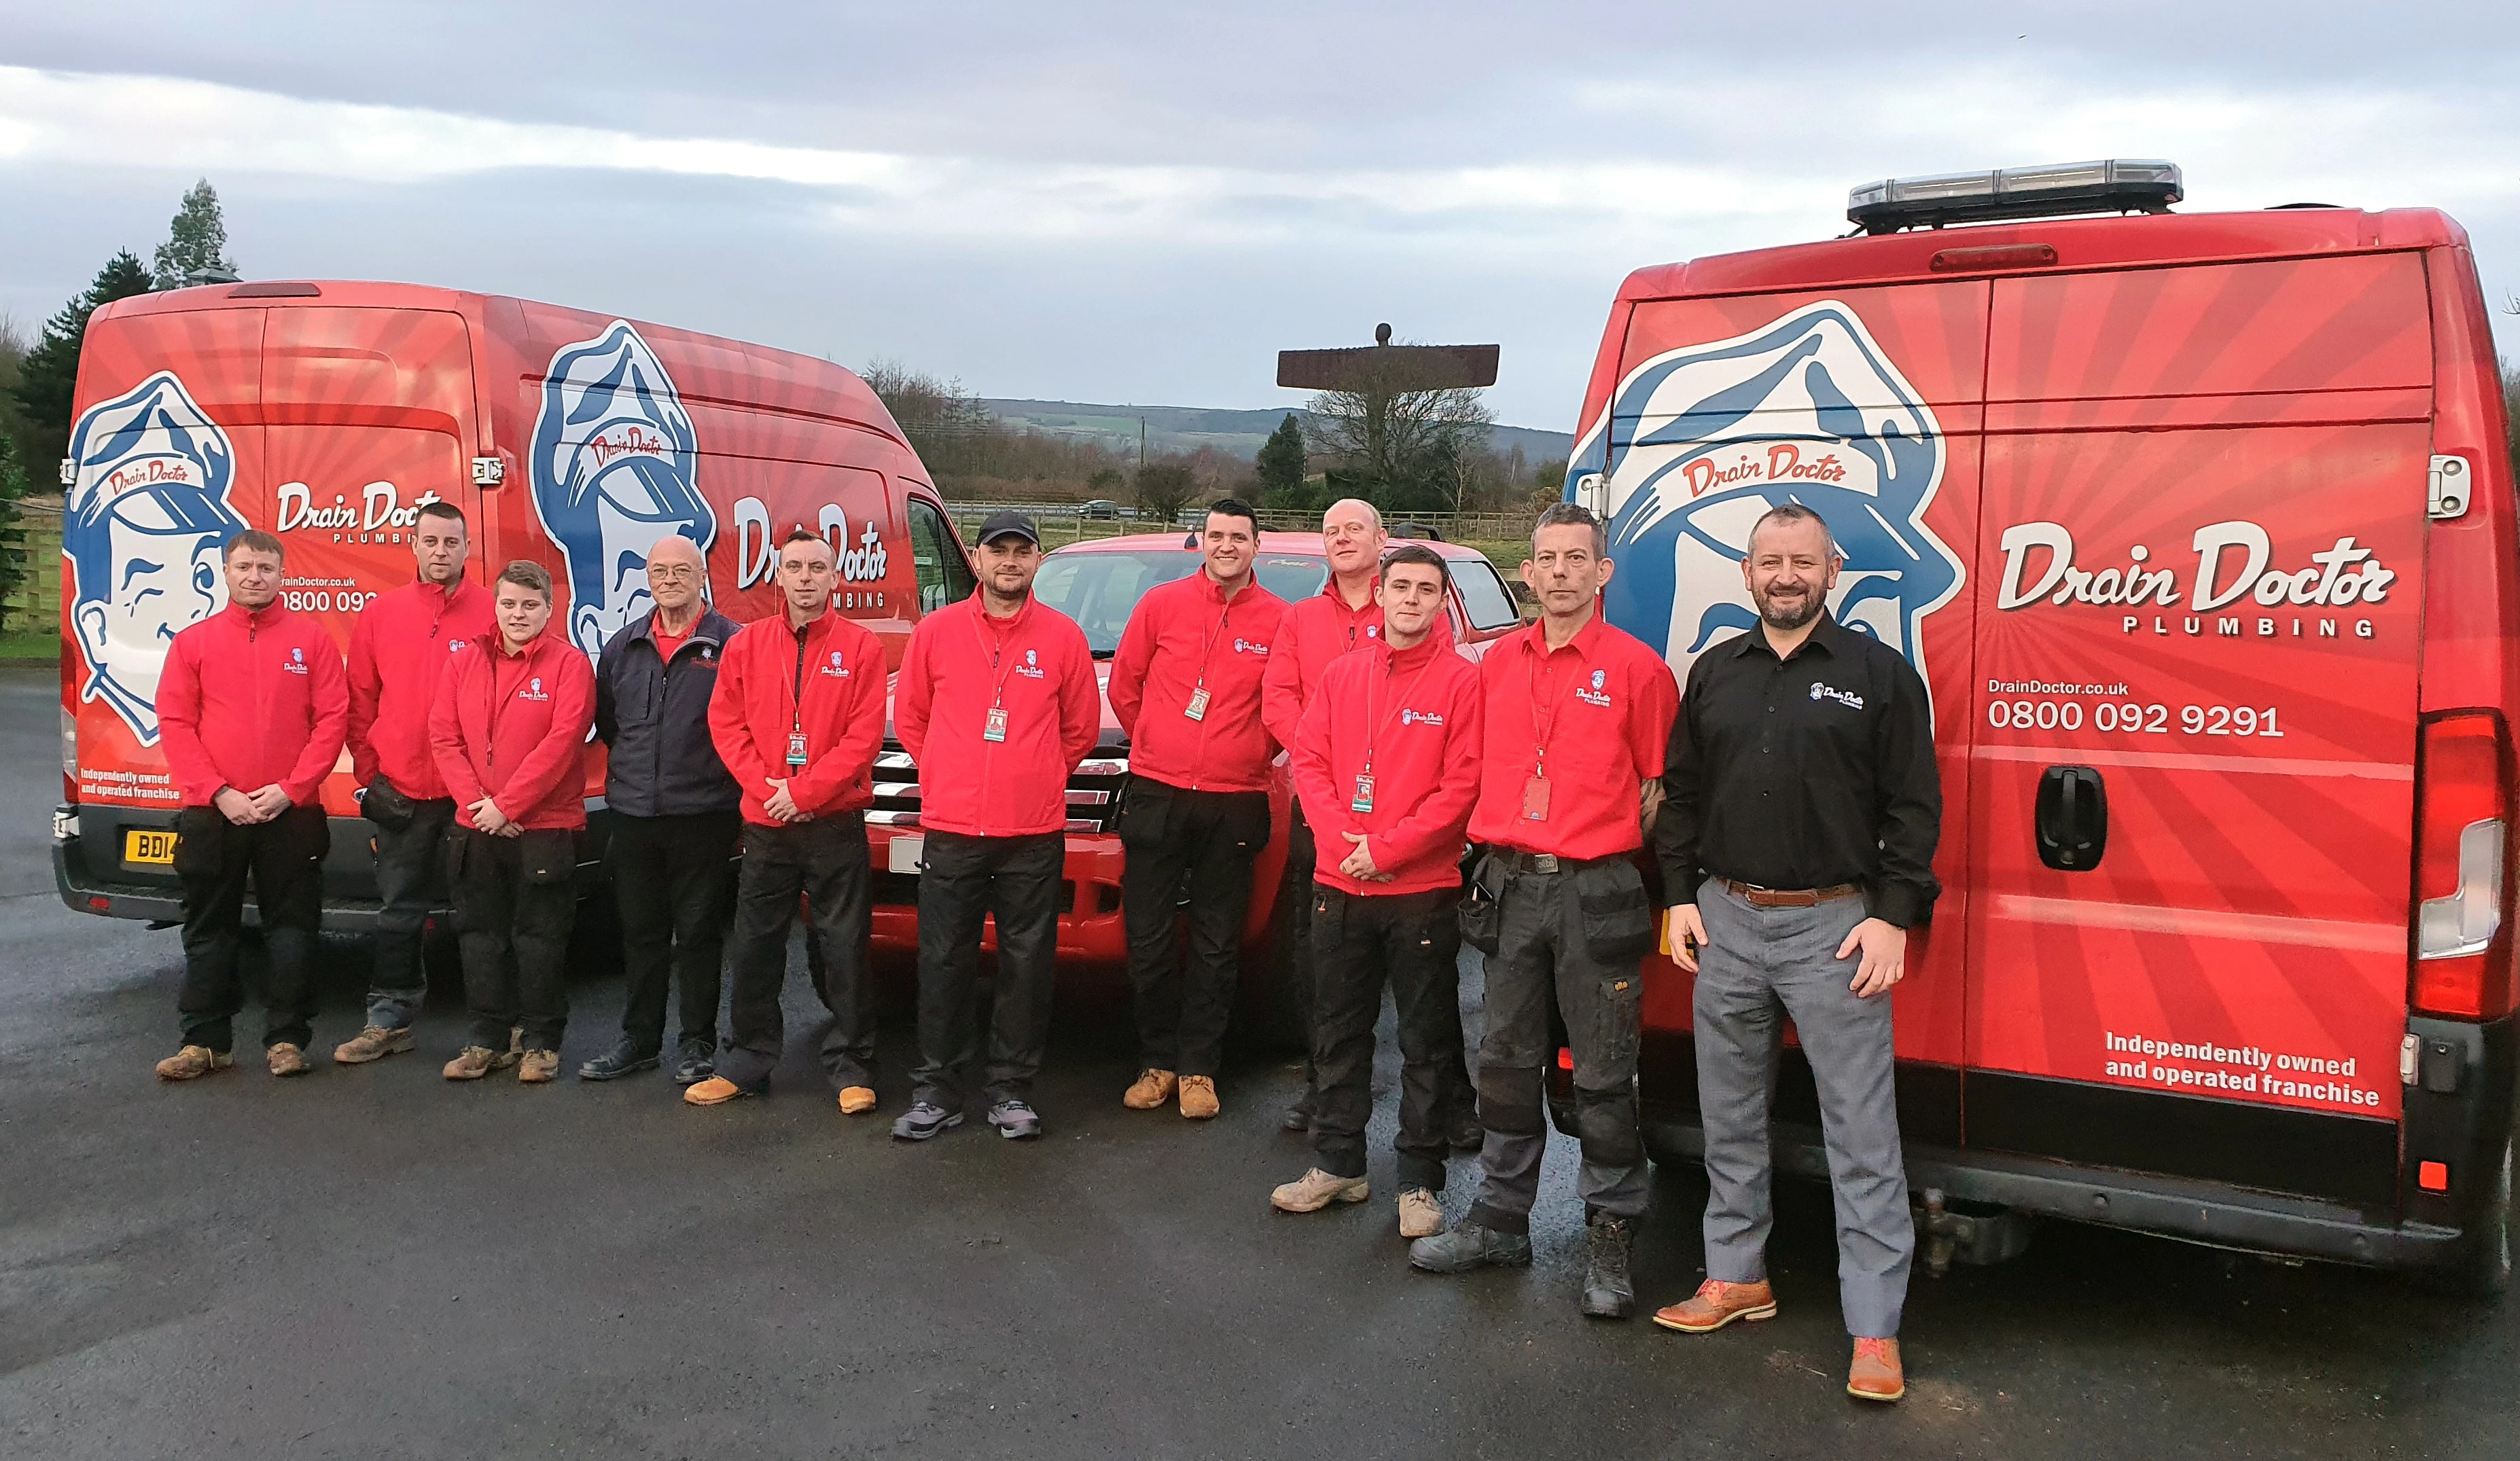 Jim Watson (on the right), Drain Doctor franchise owner, with his team of technicians.